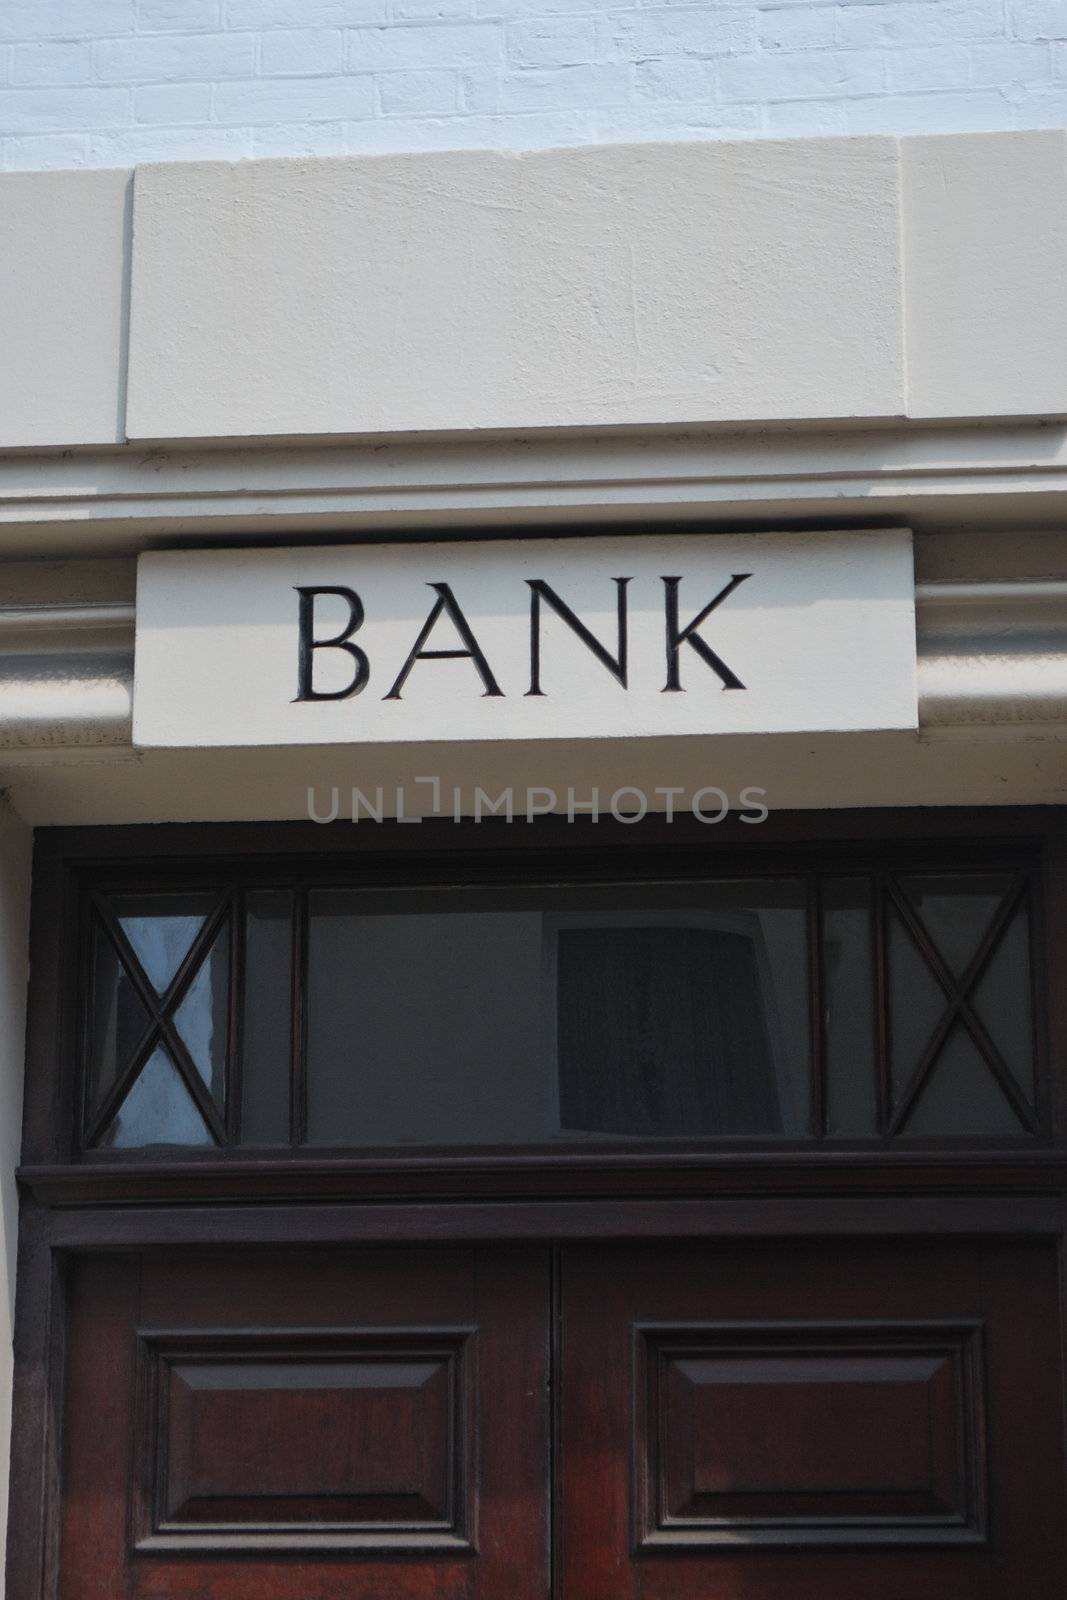 Old fashioned bank door sign in stone